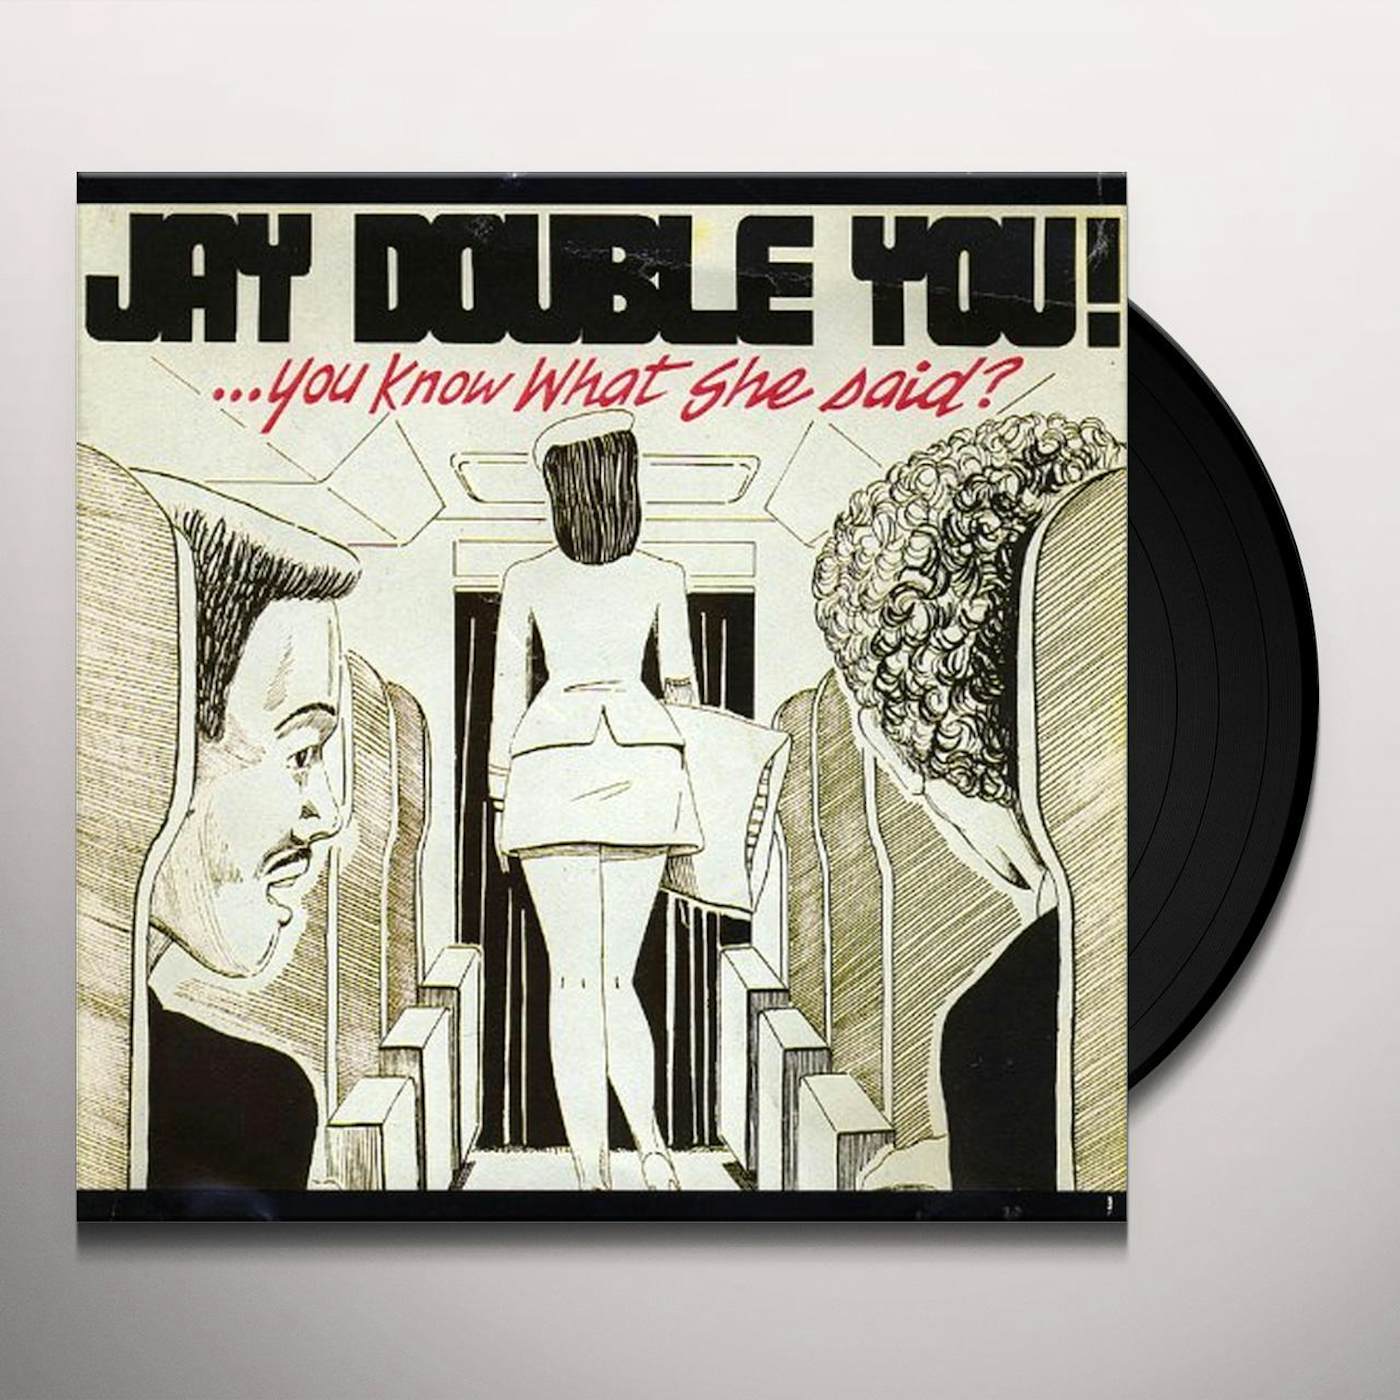 Jay Double You! You Know What She Said? Vinyl Record